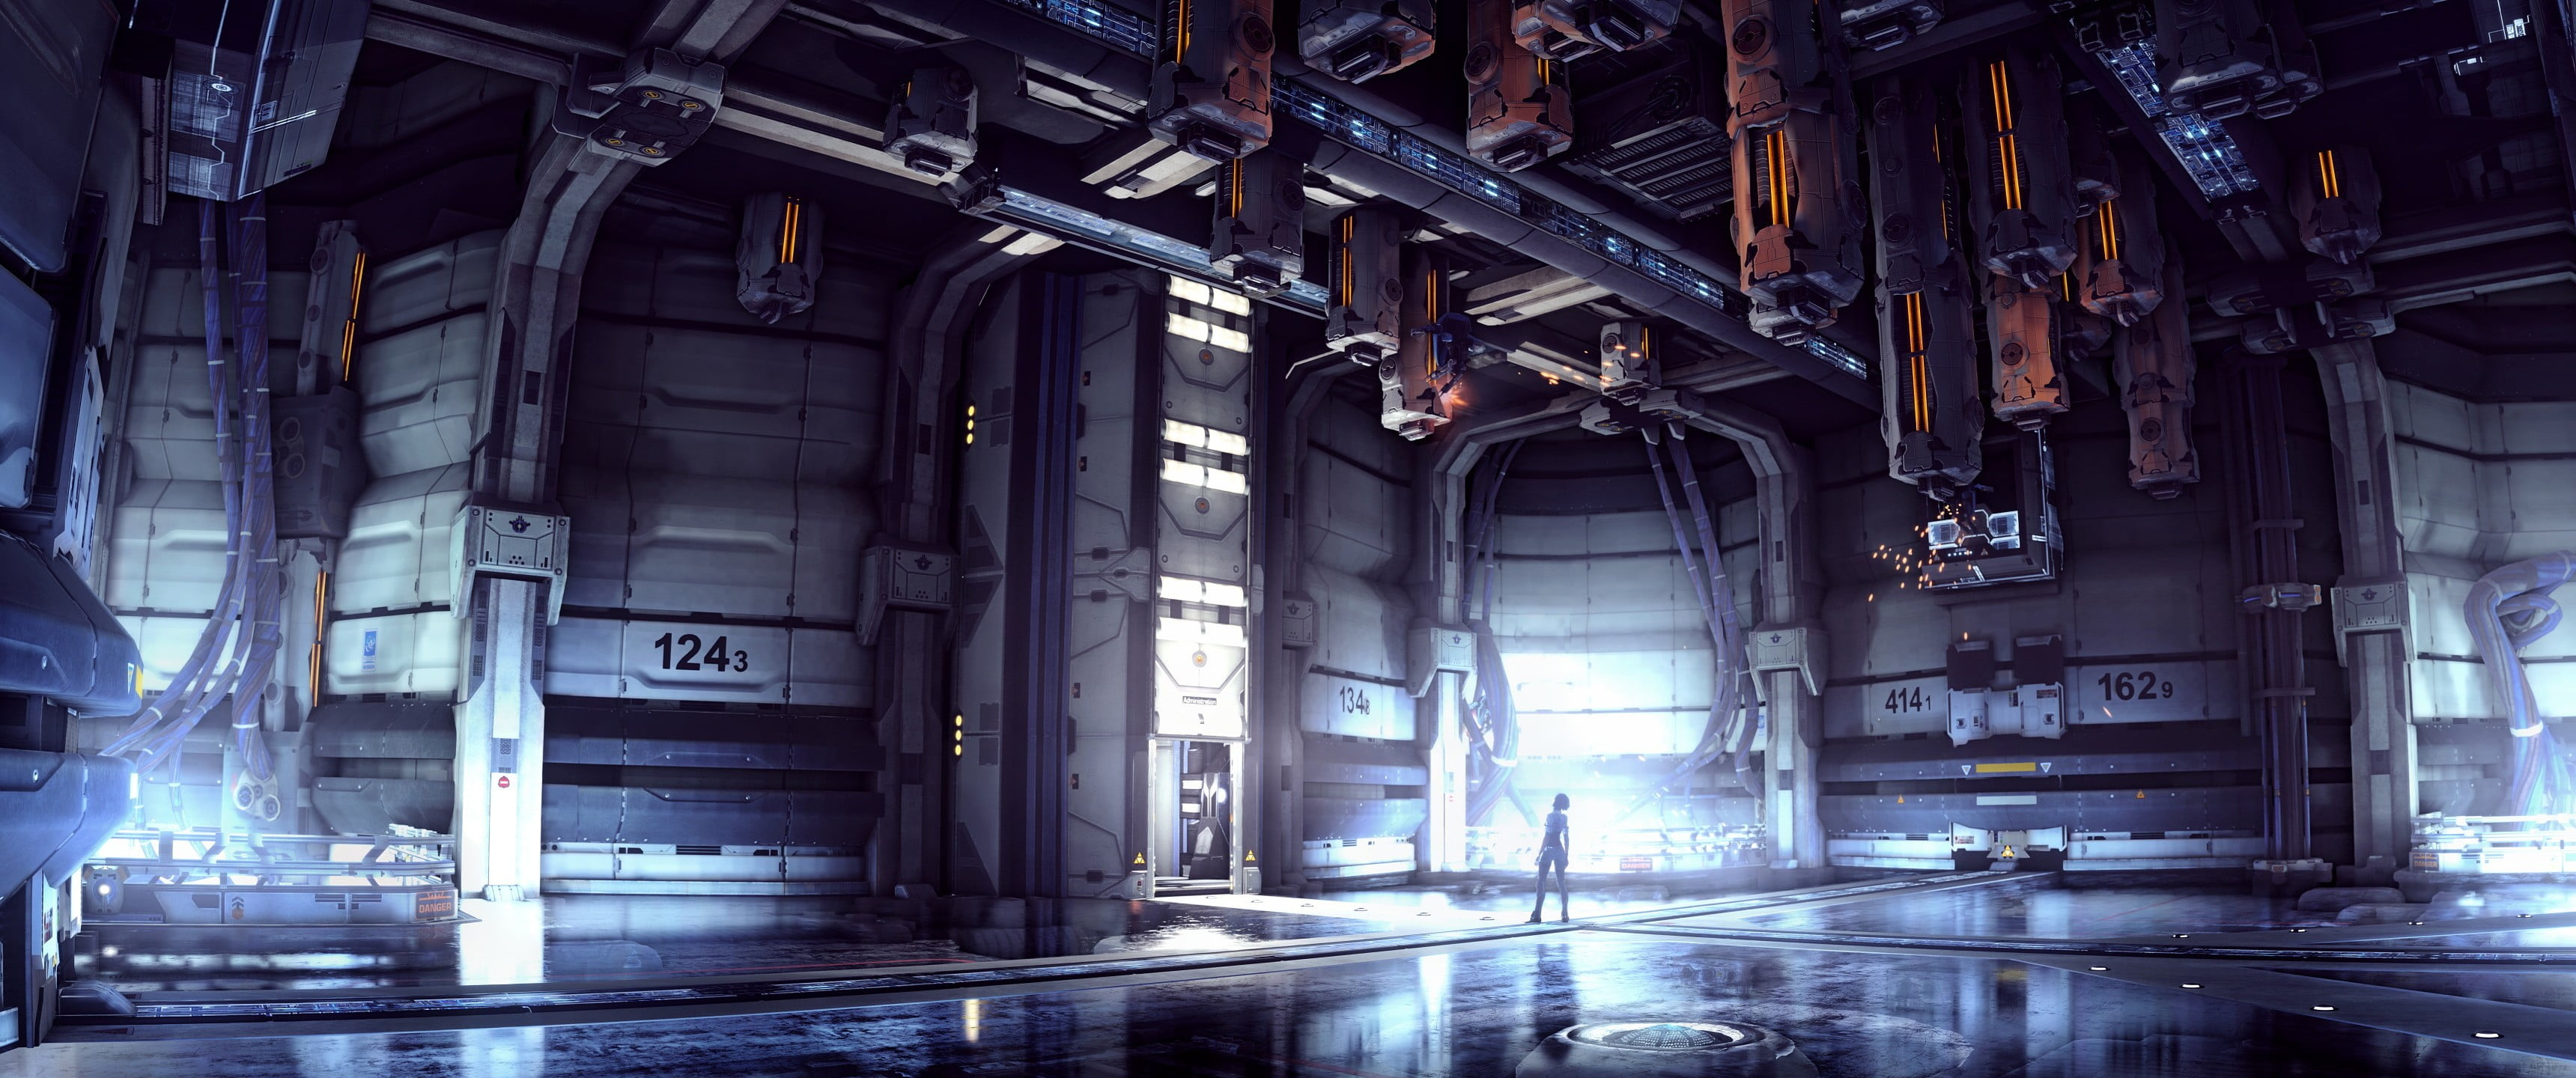 3440x1440 Animated building illustration, science fiction, Remember Me HD wallpaper |